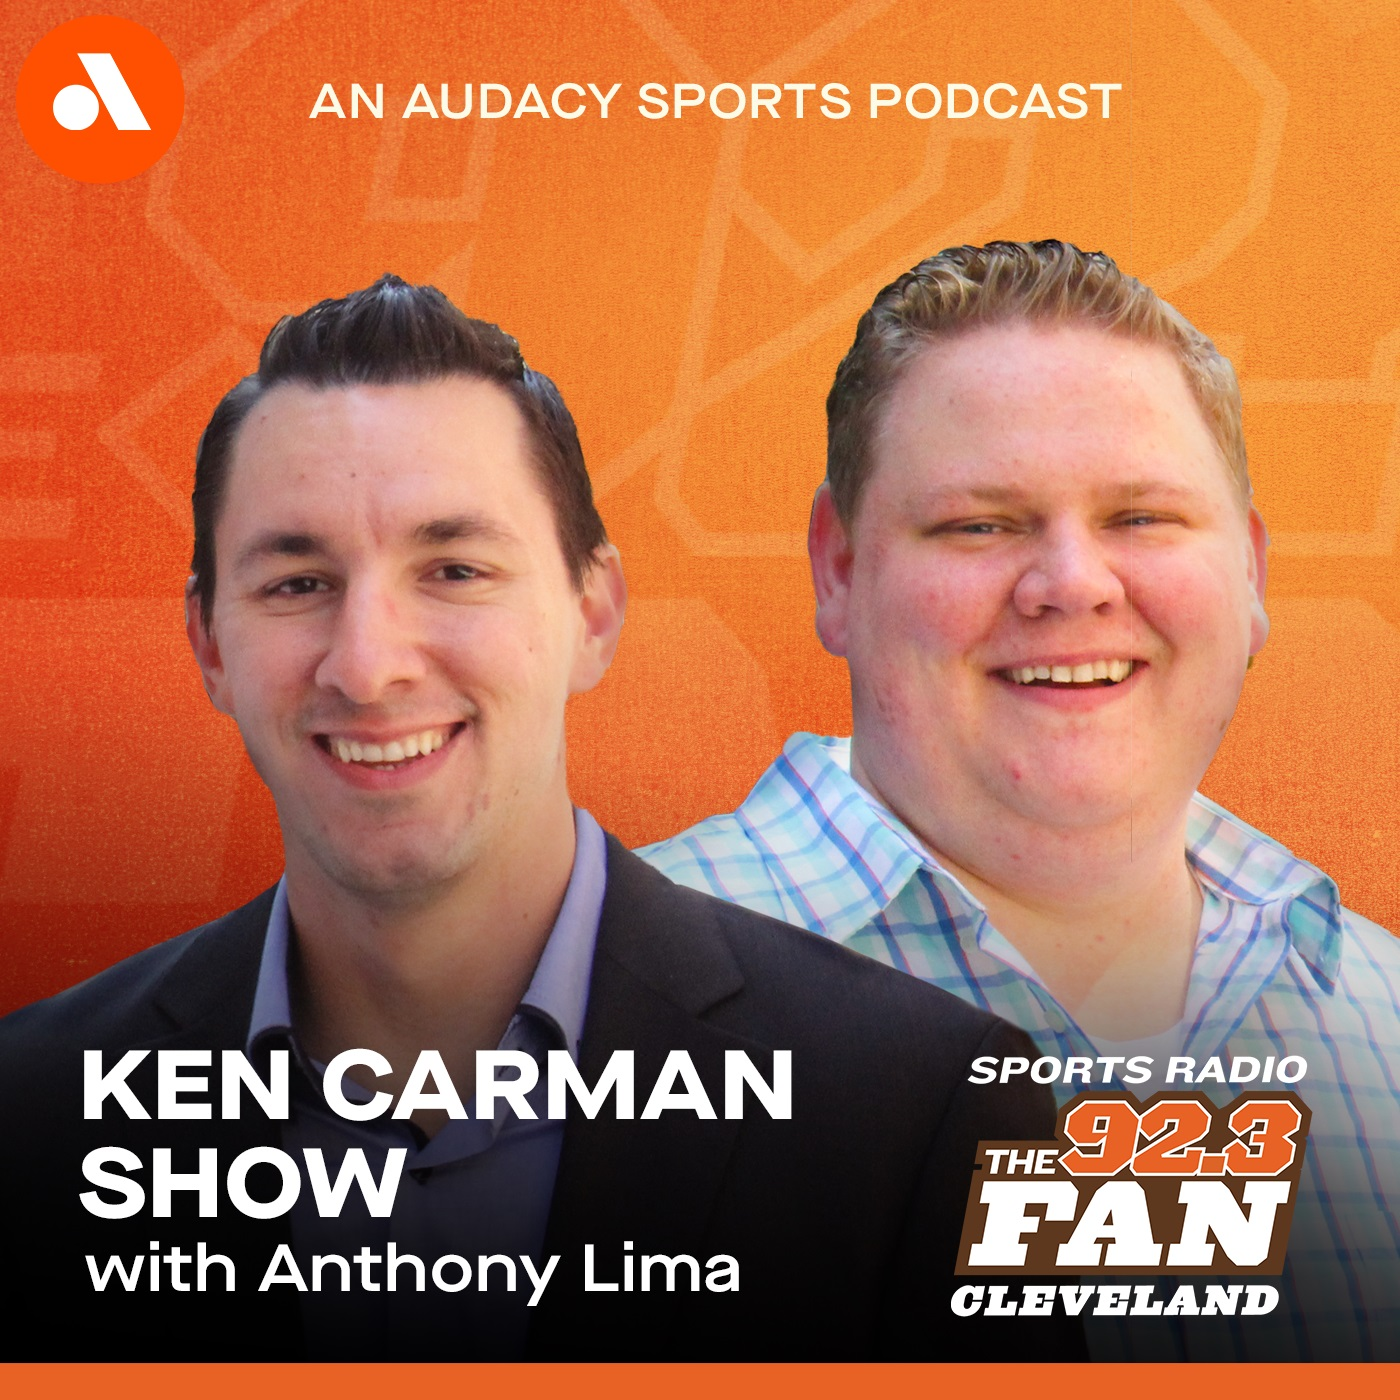 The Ken Carman Show with Anthony Lima react to Watson joining the Cleveland Browns